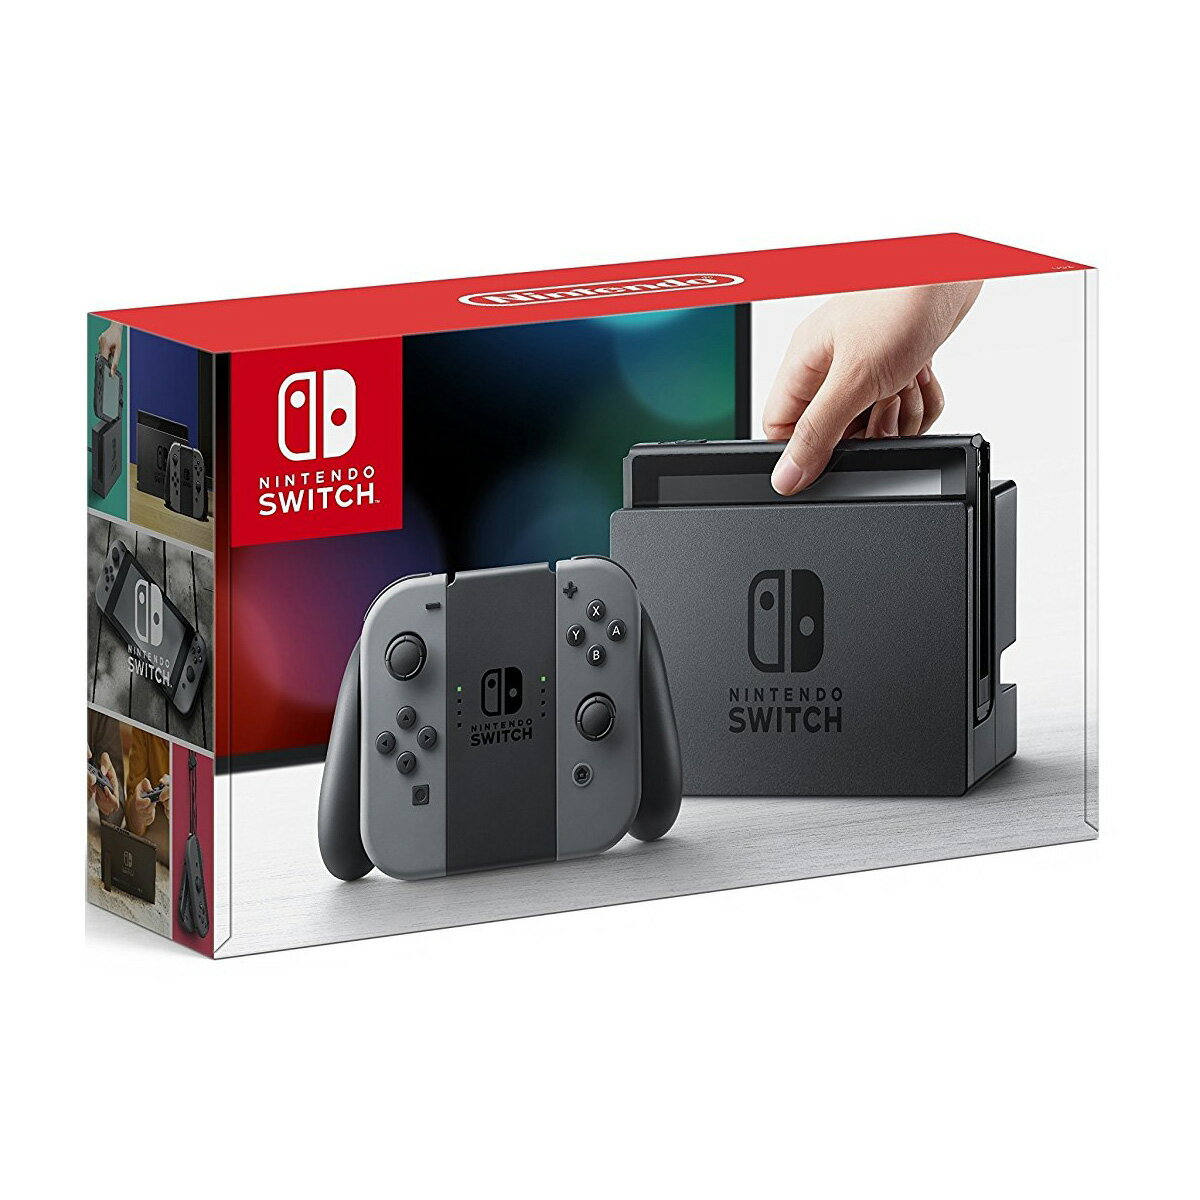 Nintendo Switch Console System 32GB with Joy-Con Wireless Controllers 0